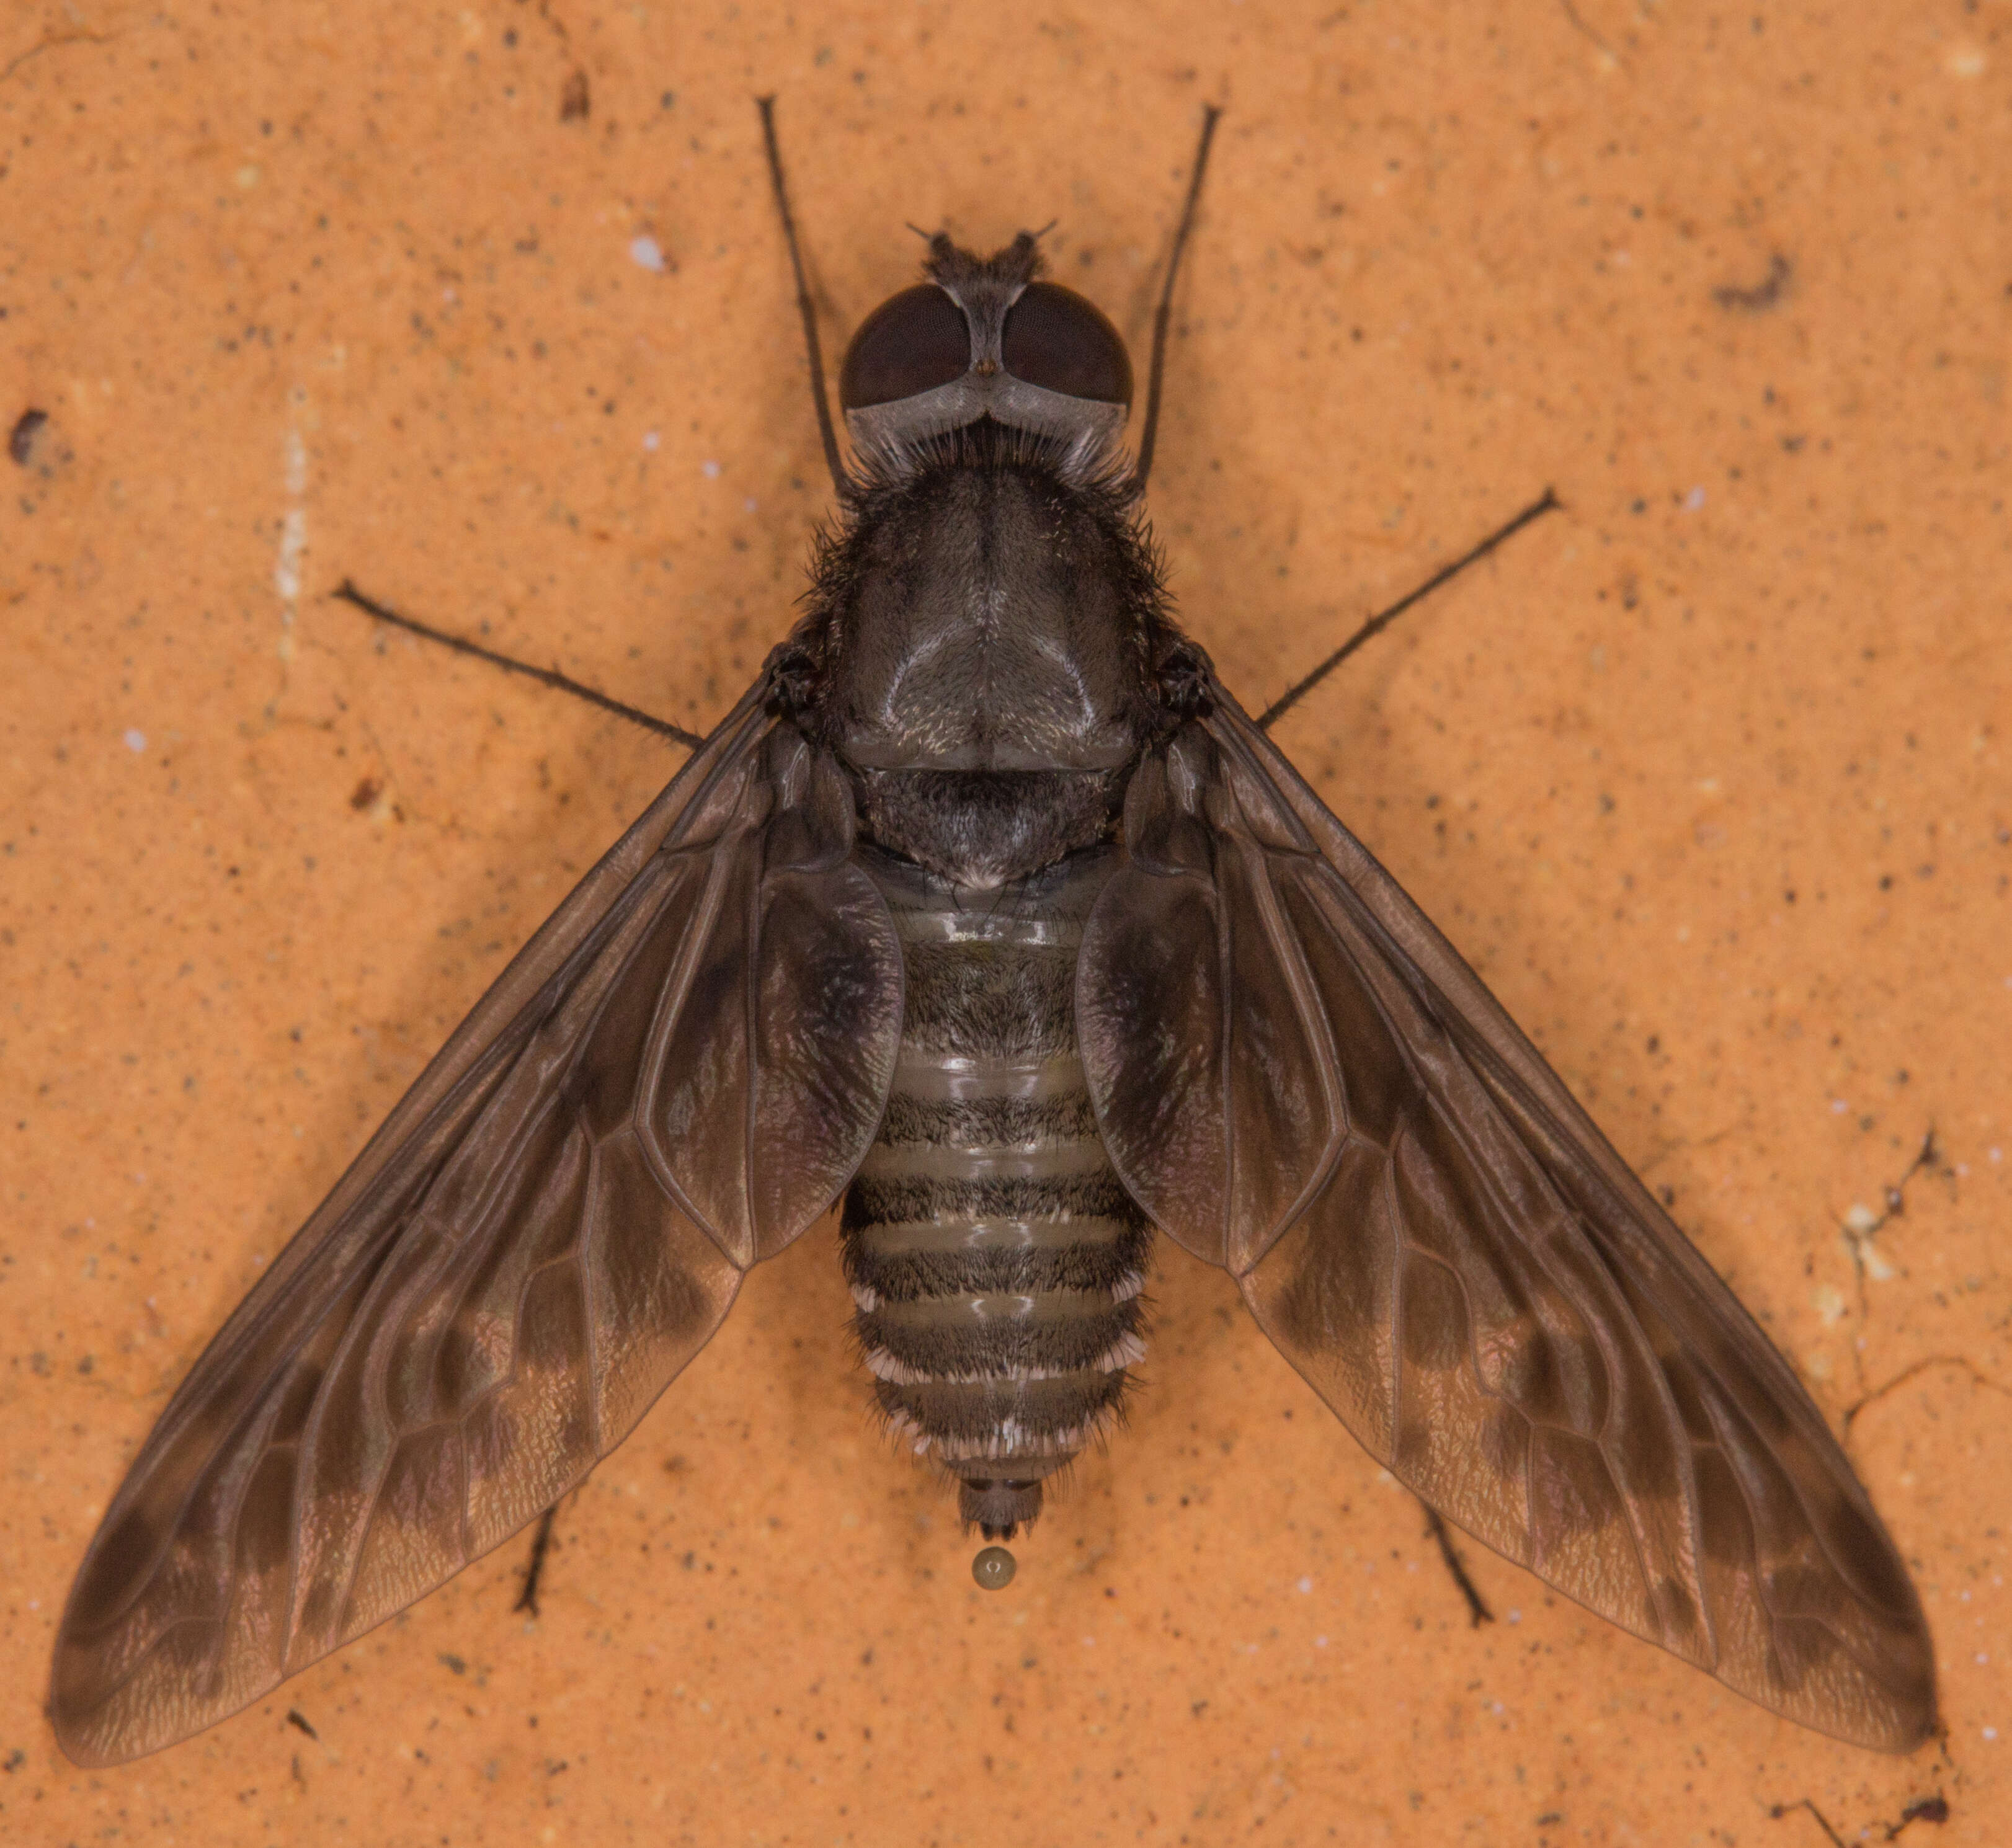 Image of Bee Fly